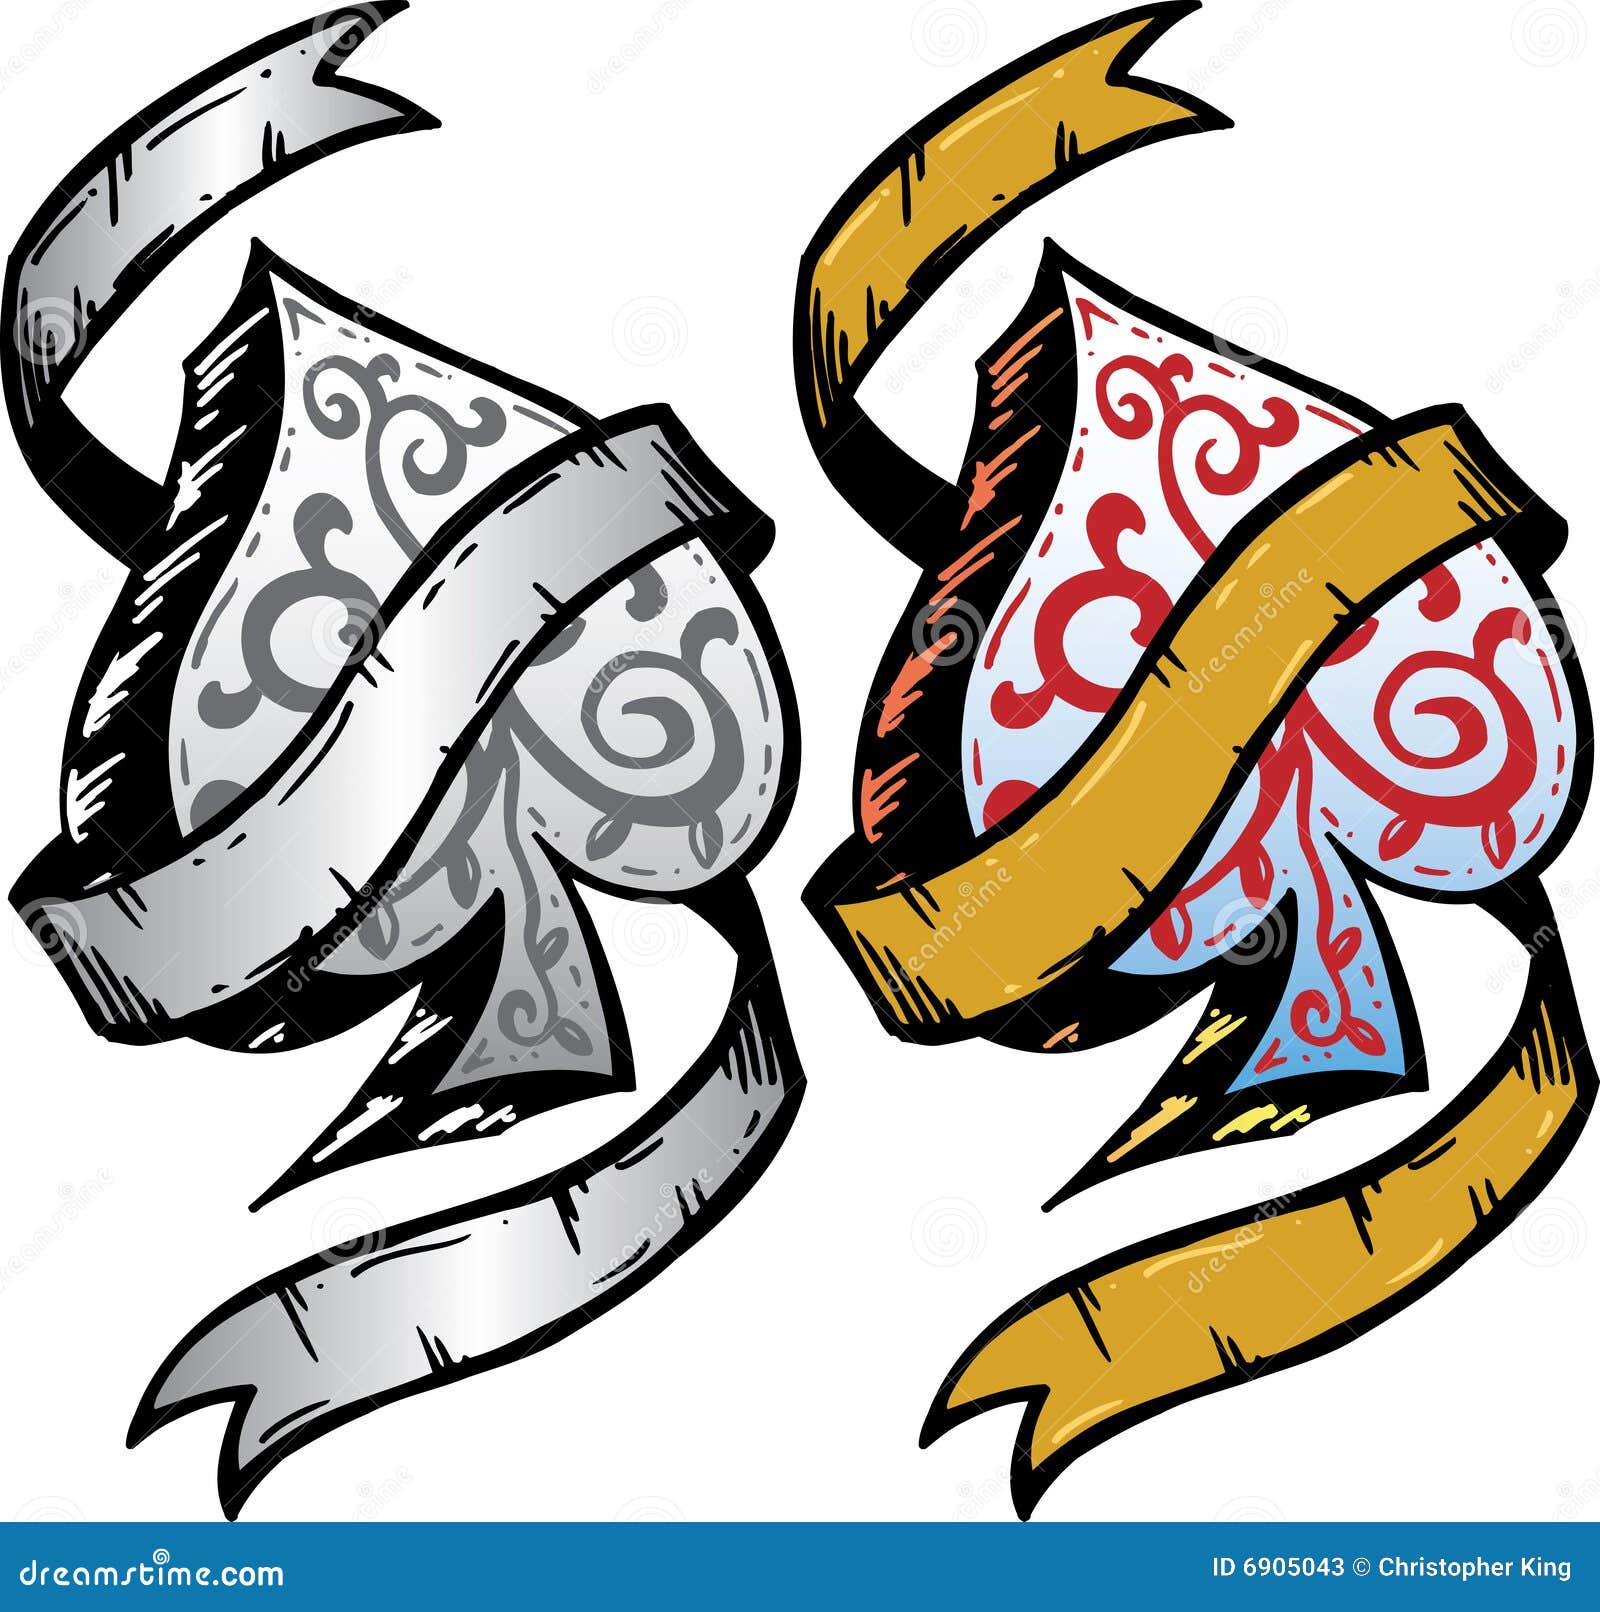 Jester With Ace Of Spades Tattoo  Tattoo Ideas and Designs  Tattoosai